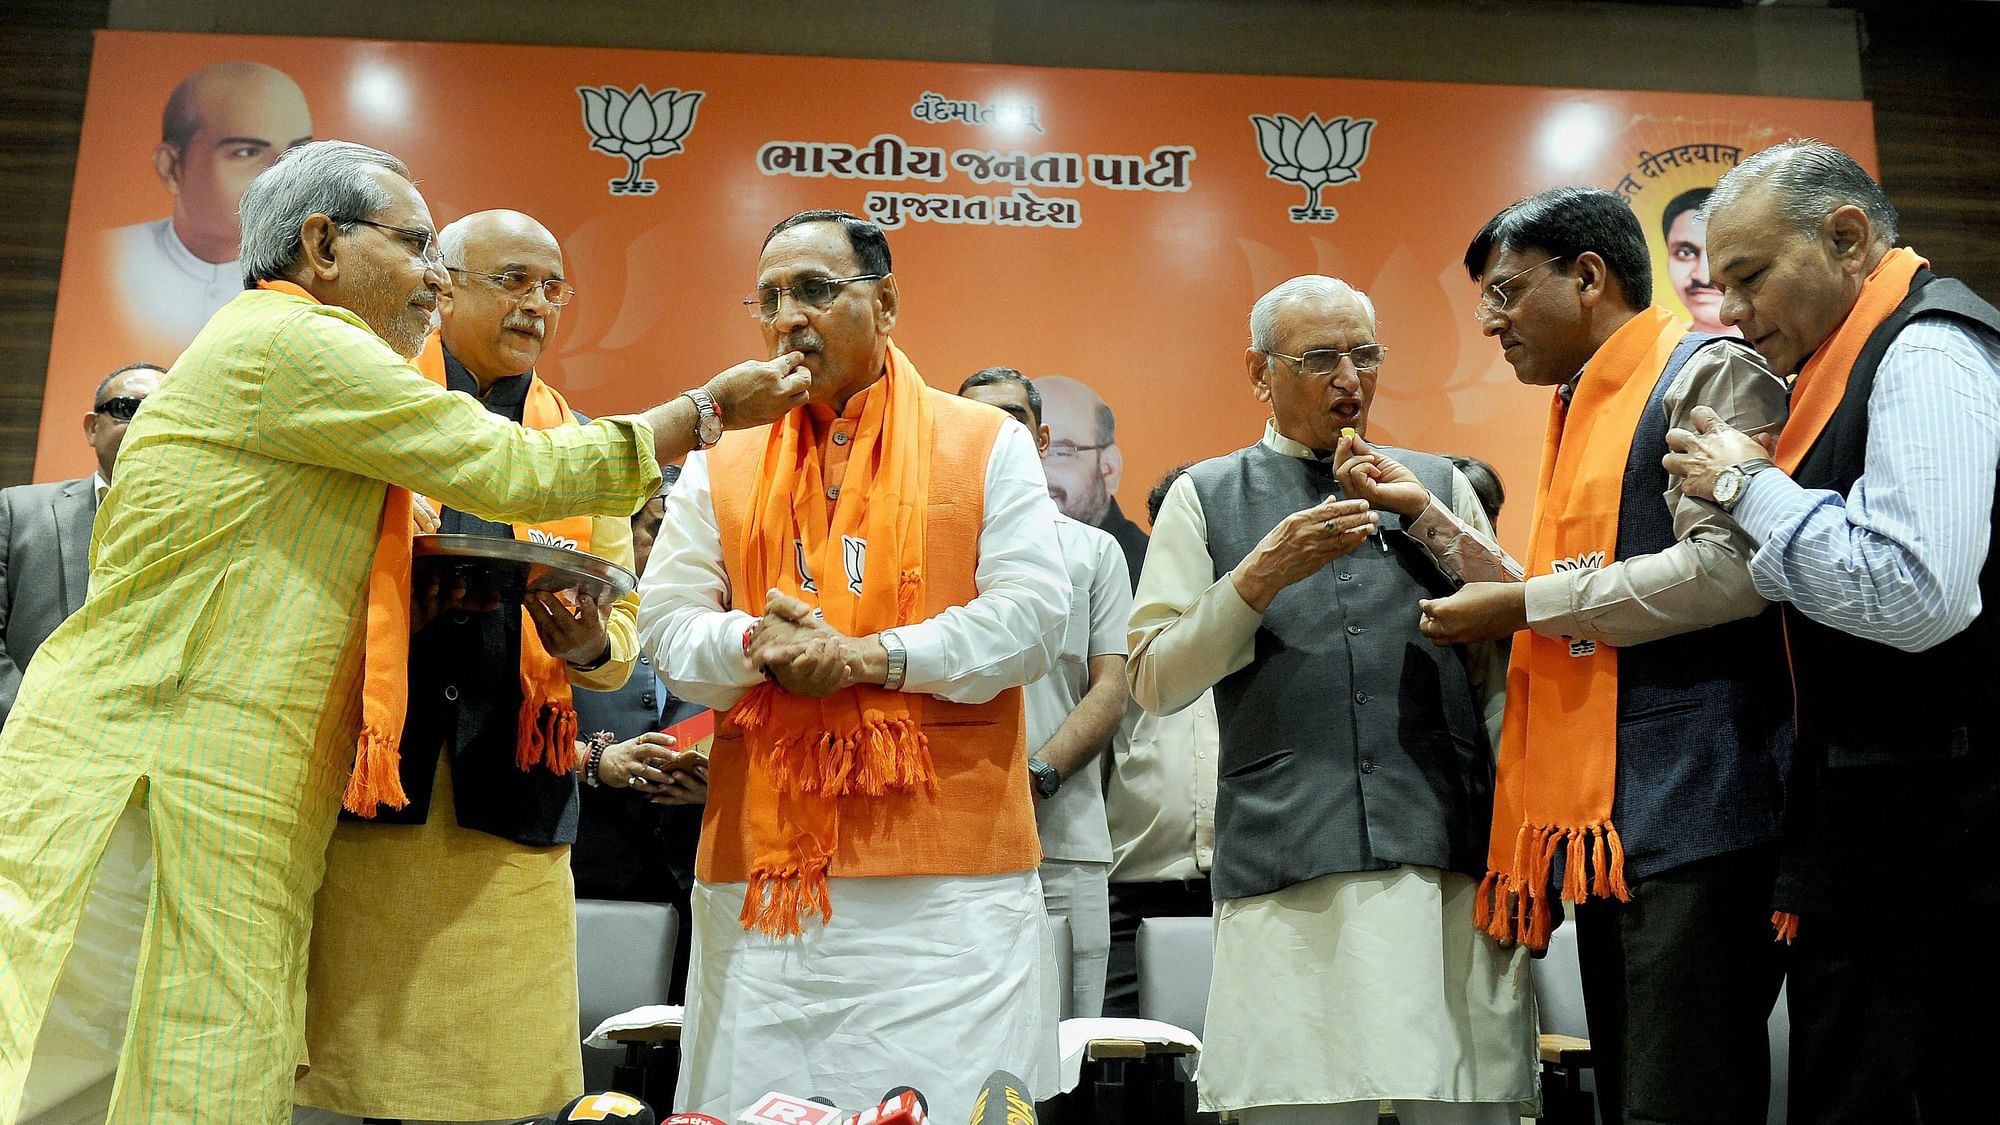 BJP leaders offering sweets to Gujarat Chief Minister Vijay Rupani after the party’s win in the state assembly election.